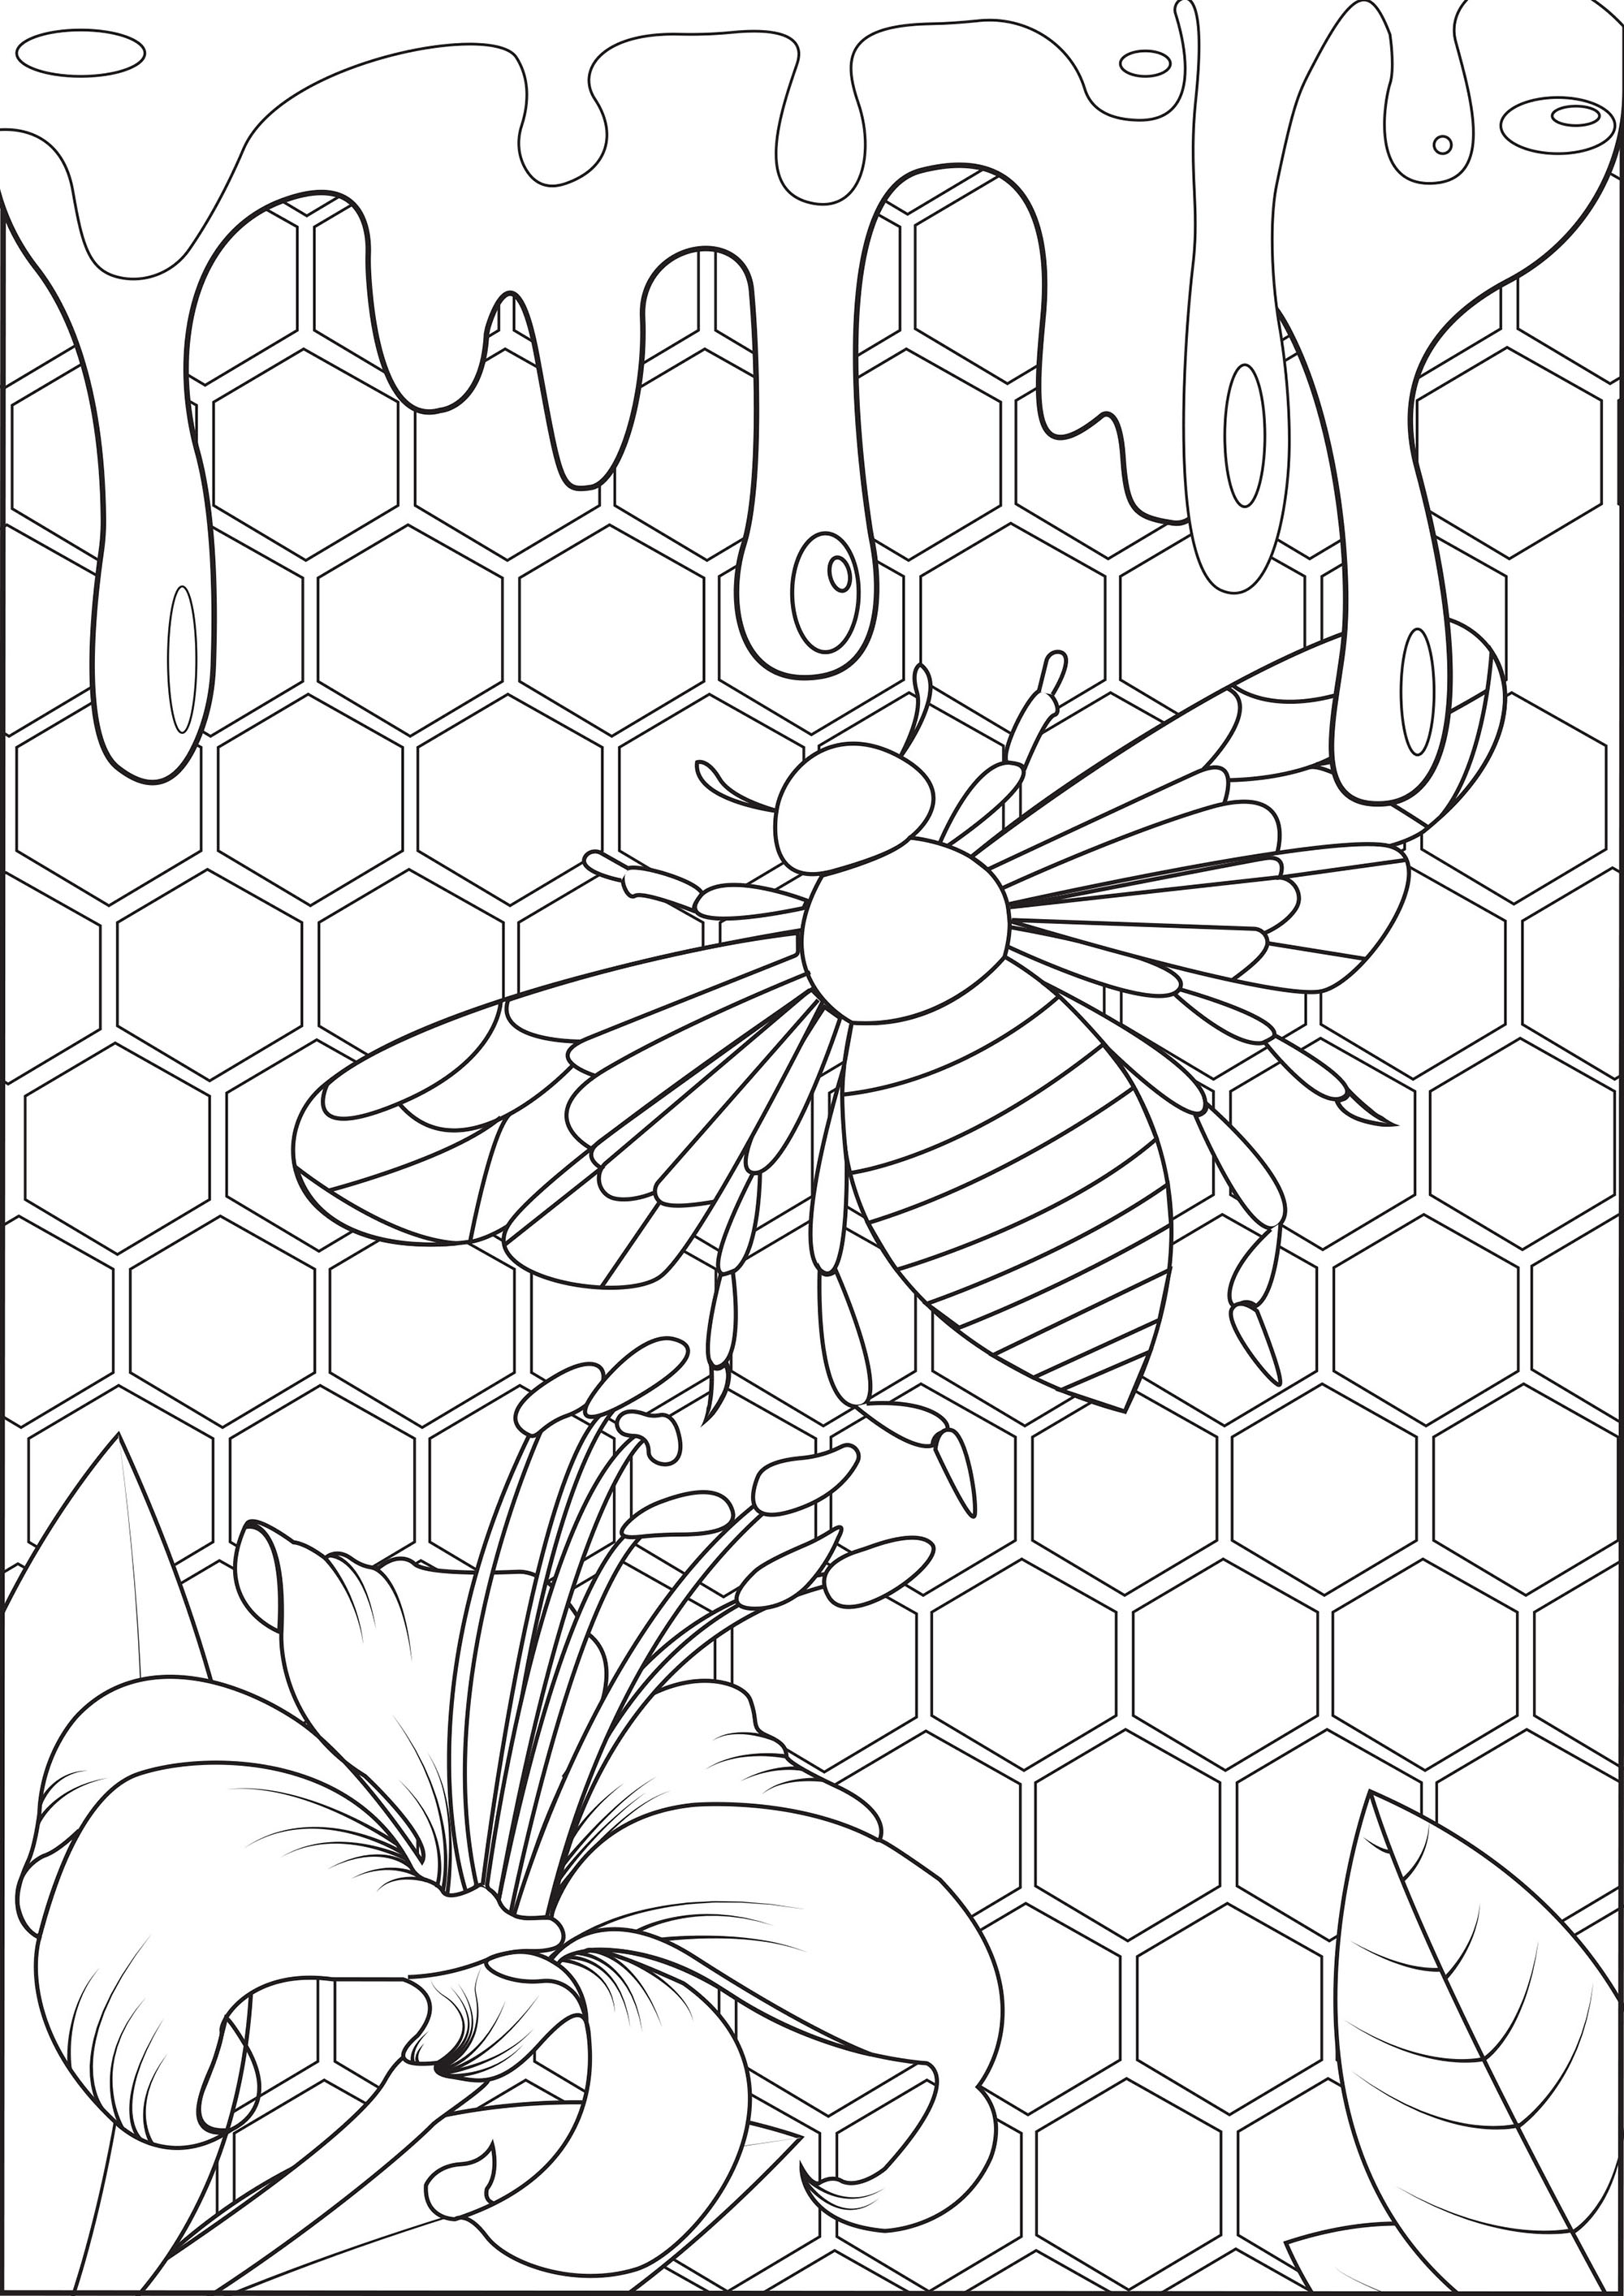 Bees and honey - Butterflies & insects Adult Coloring Pages